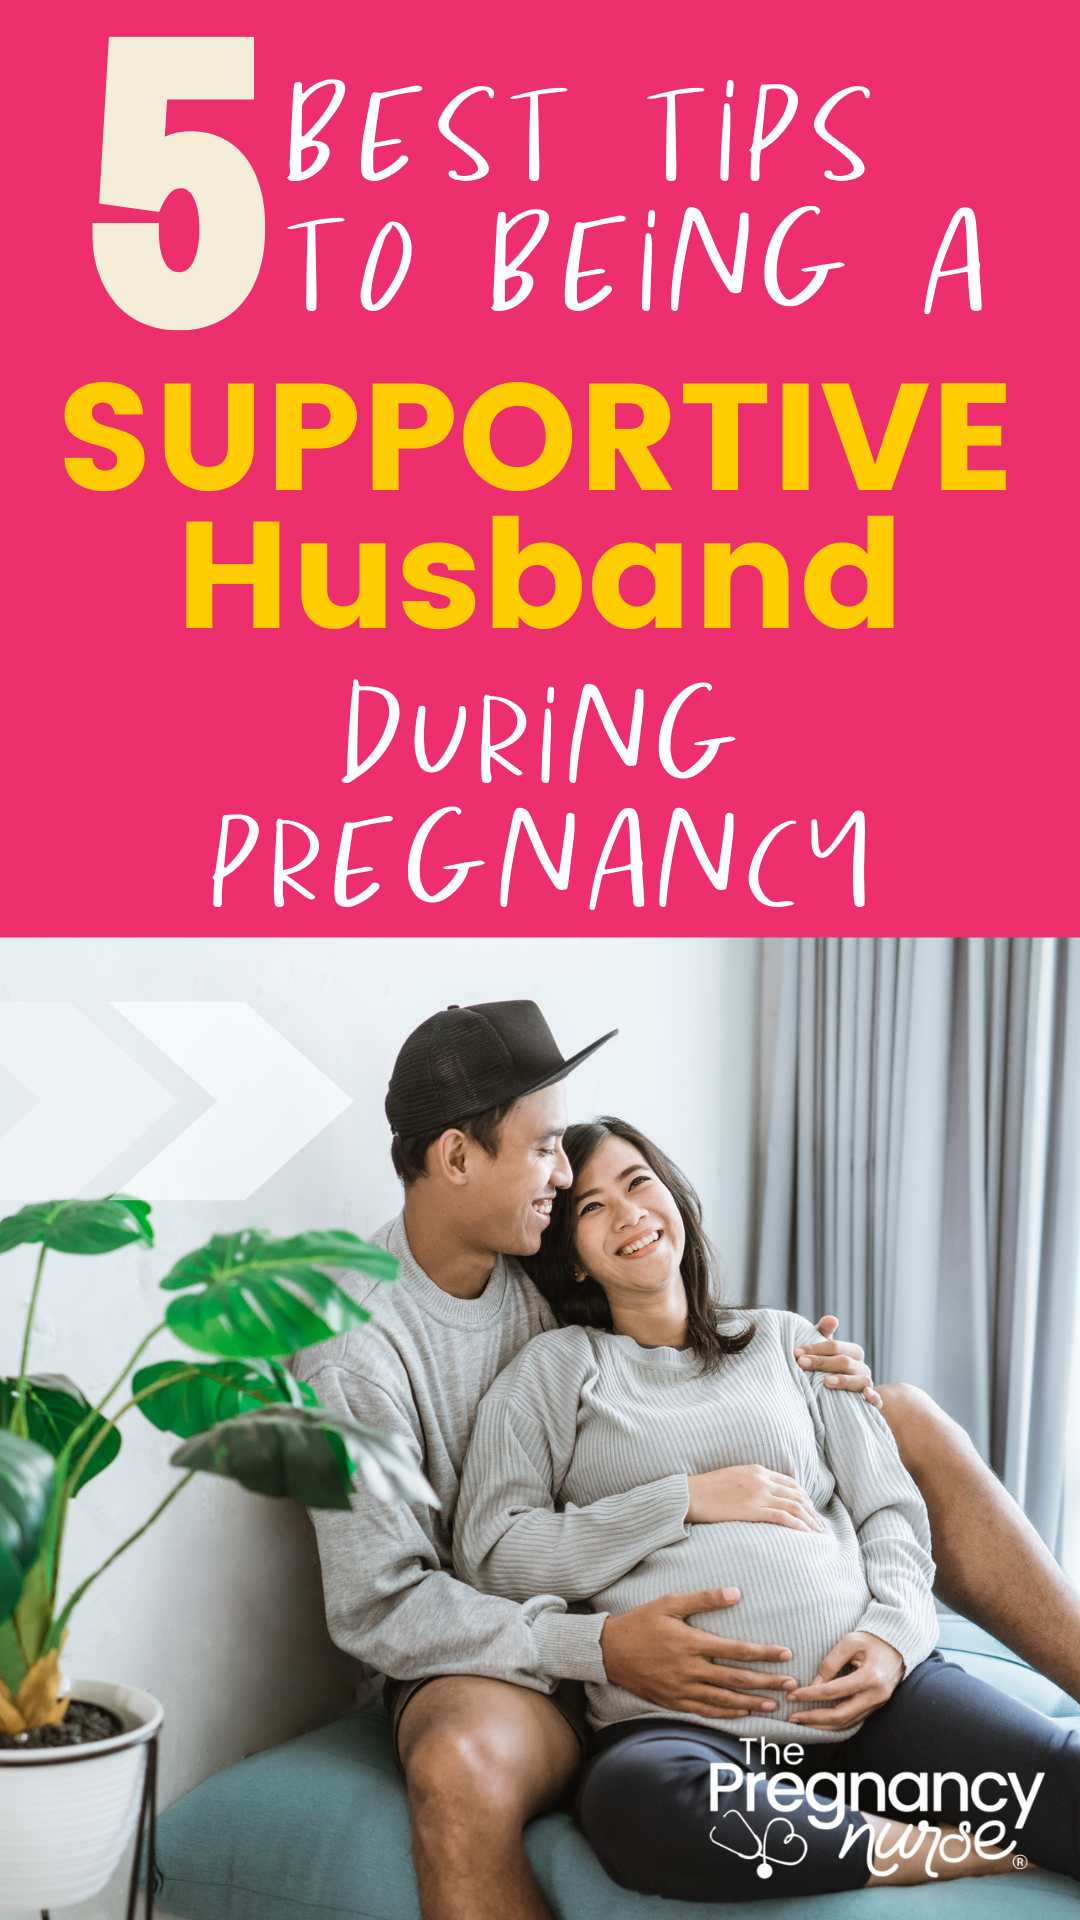 Discover the ultimate guide on lending emotional and physical support during your partner's pregnancy journey. This comprehensive guide shares insightful 'how-to' pointers, reinforcing your role as a supportive, caring, and understanding husband. Brace yourself to be the pillar of strength your spouse needs throughout her pregnancy journey. Dive into this essential read today!